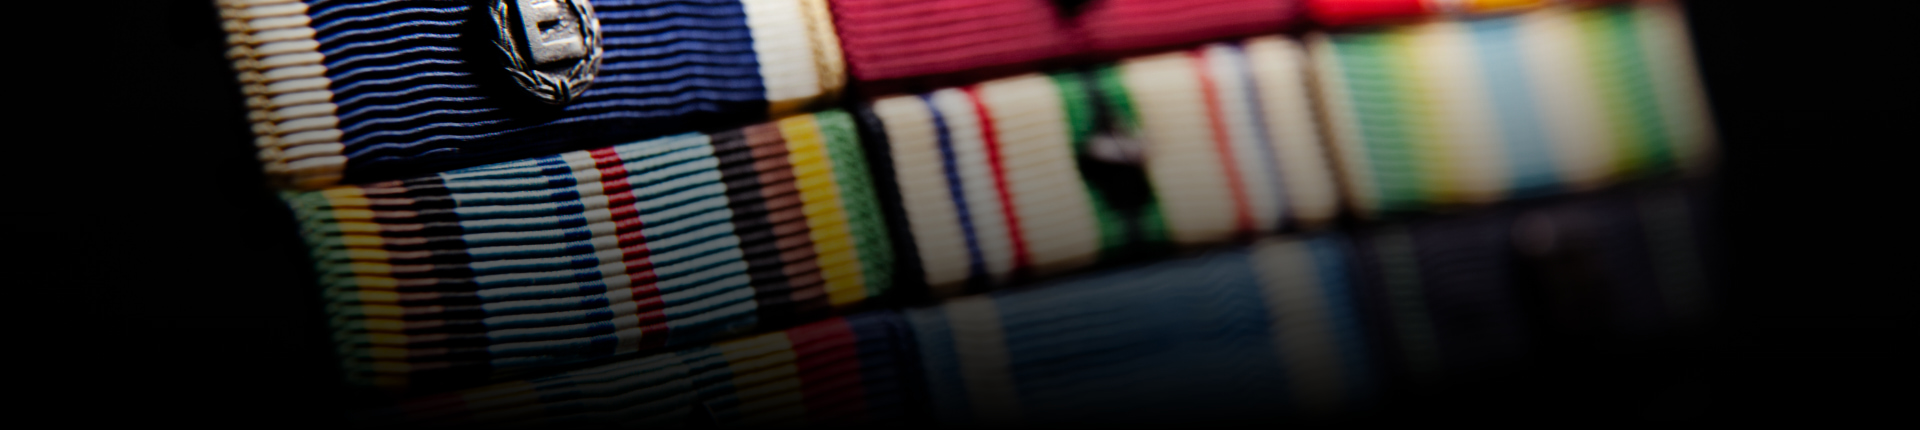 close up of military medals